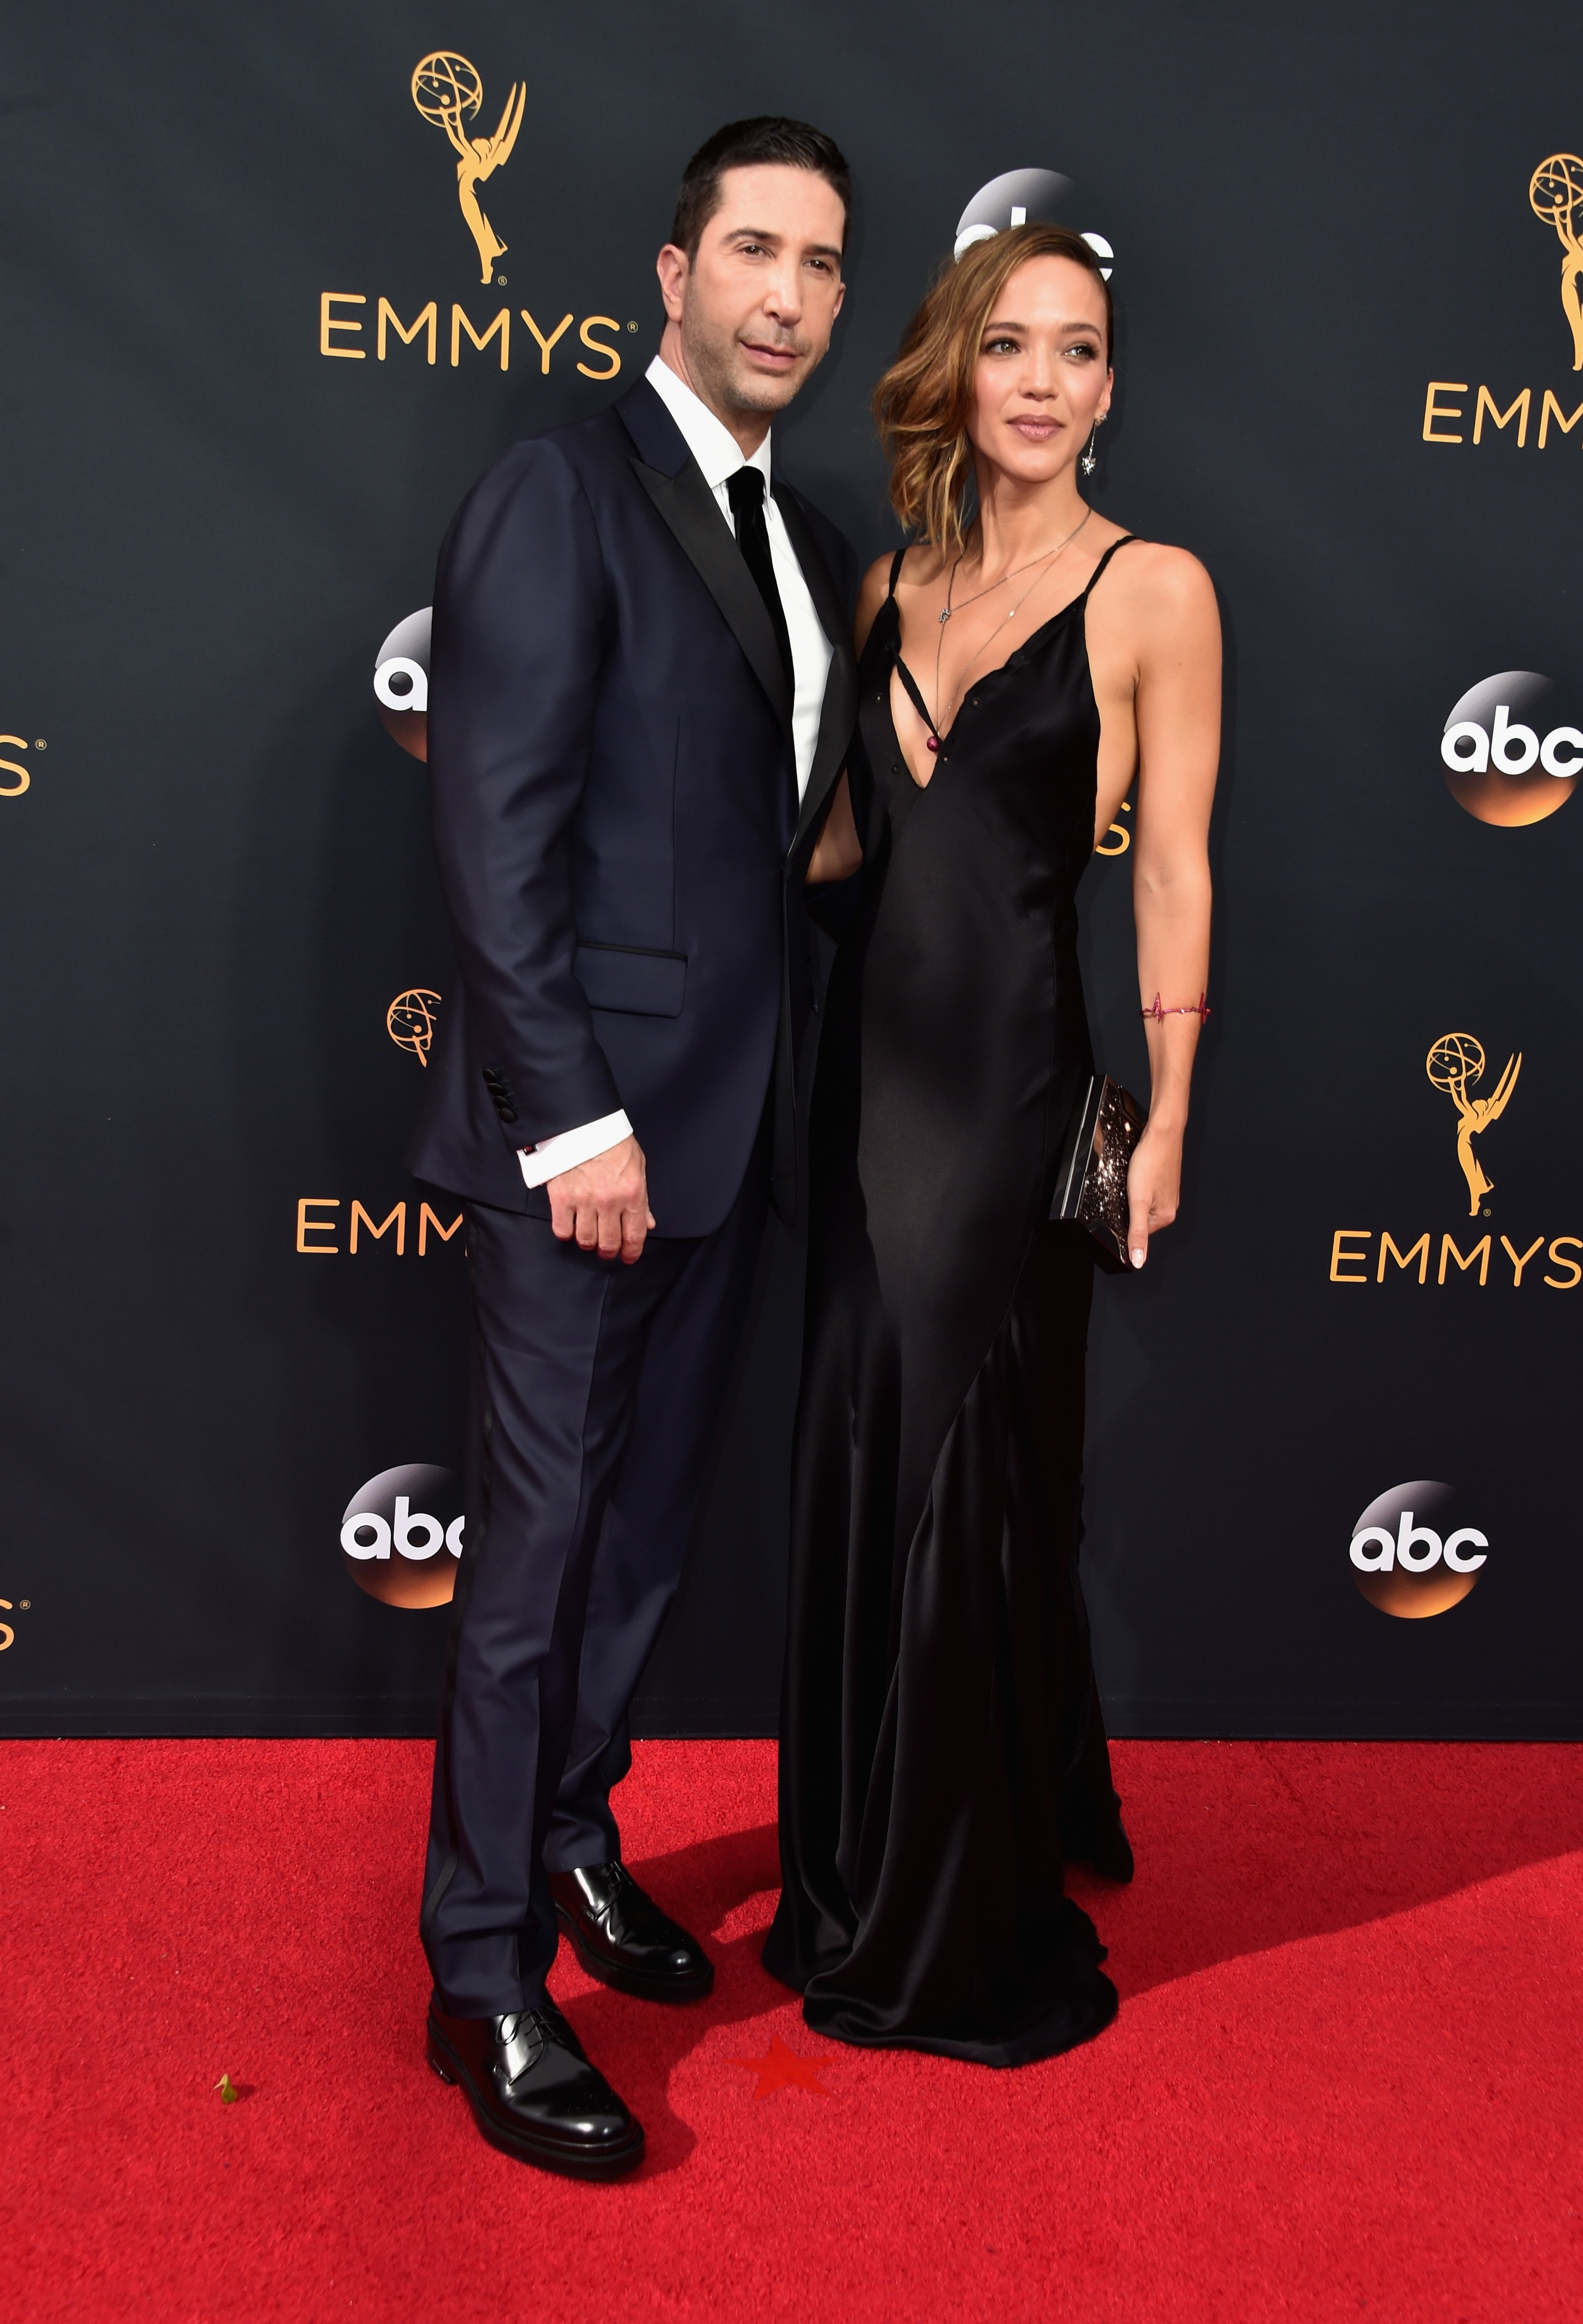 David Schwimmer and Zoe Buckman attend the 68th Annual Primetime Emmy Awards at Microsoft Theater on September 18, 2016 in Los Angeles